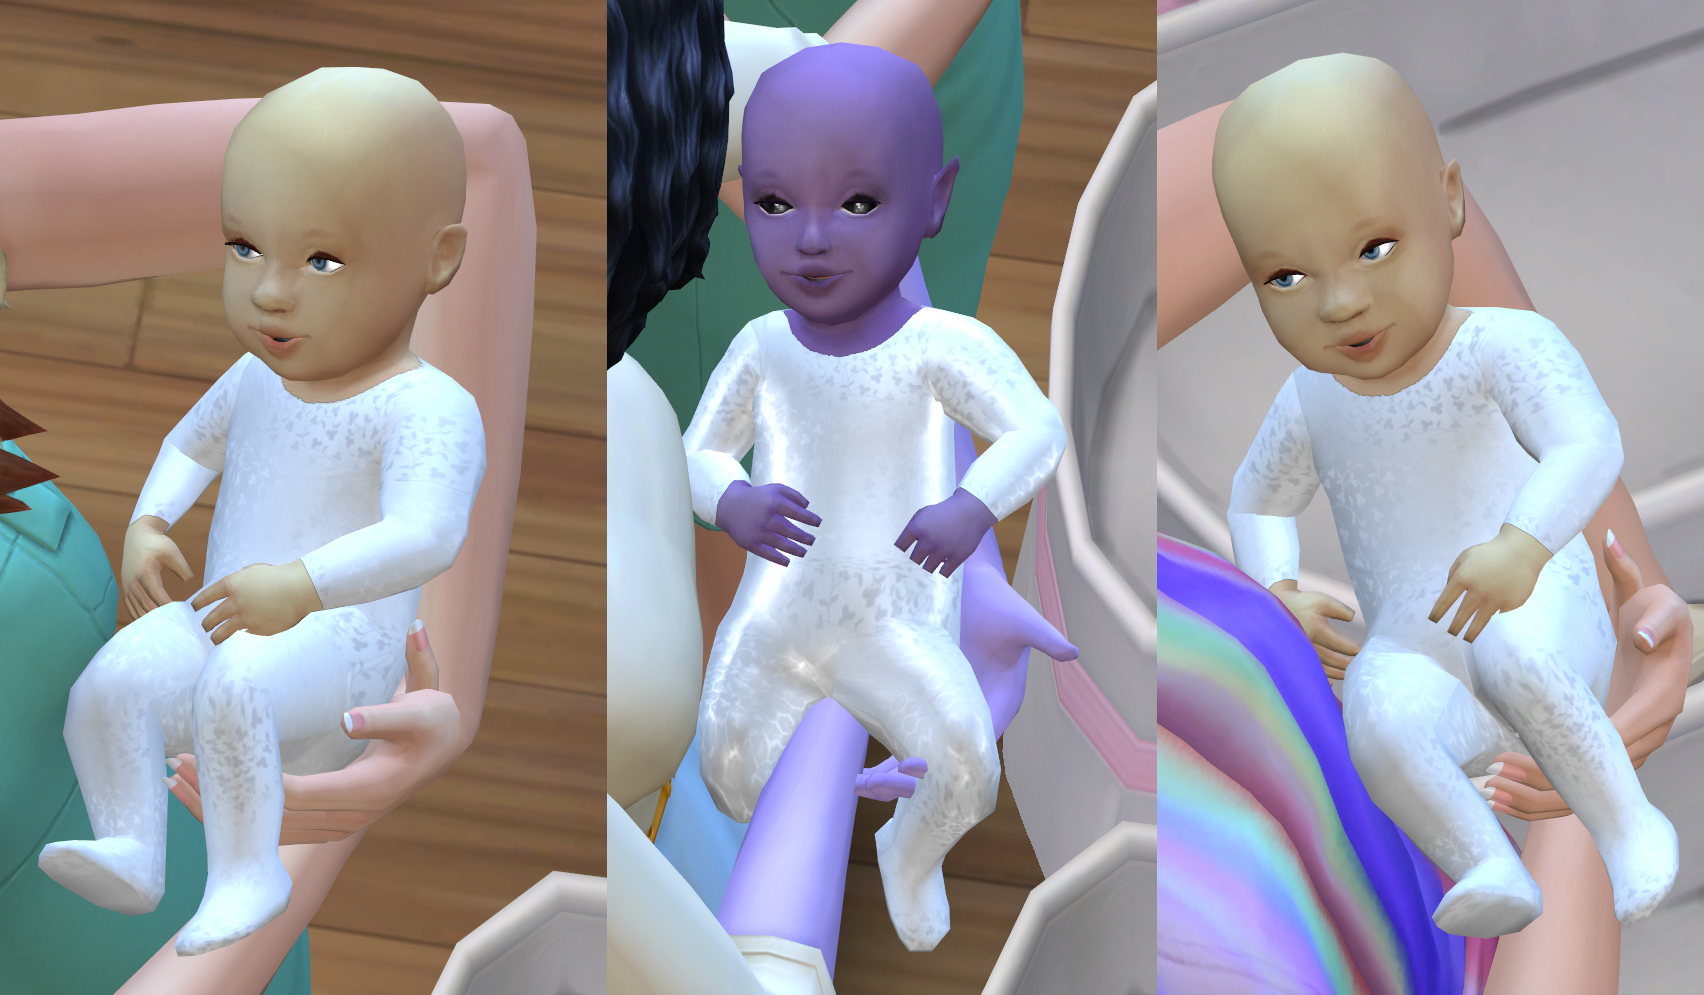 Satin Footsies baby outfit - The Sims 4 Mods - CurseForge